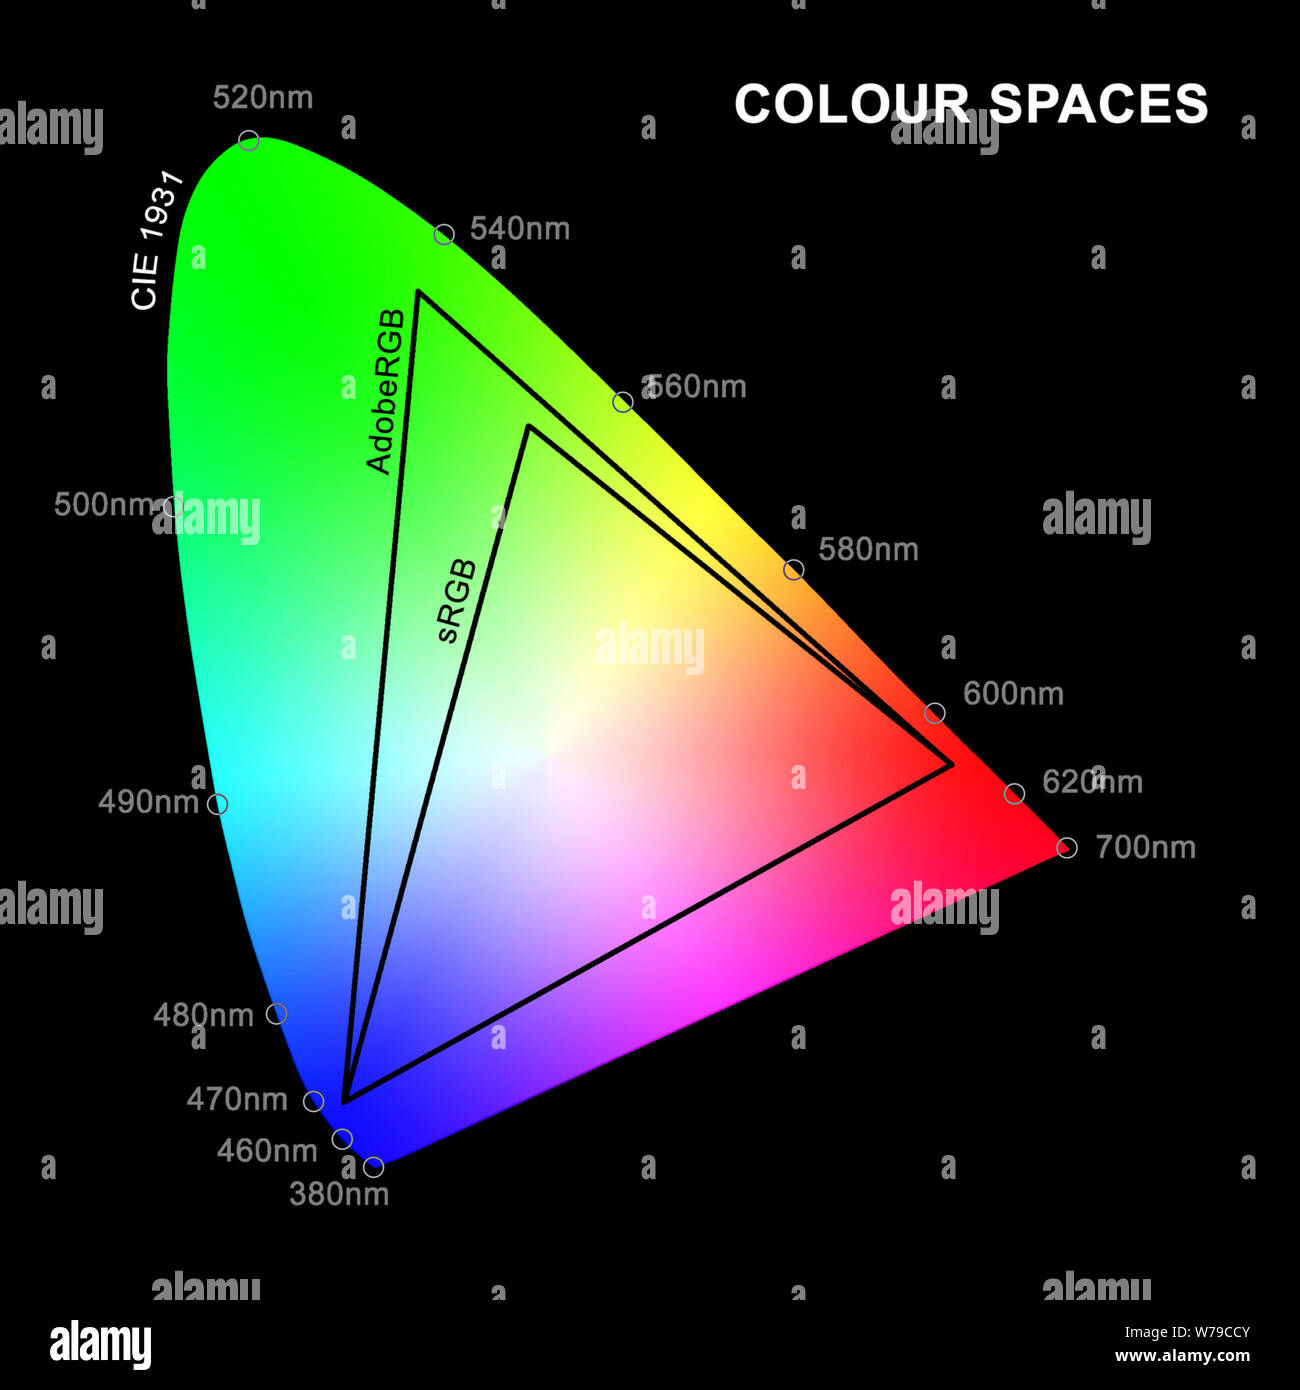 An illustration of sRGB and AdobeRGB colour spaces overlaid on CIE 1931 Chromaticity Diagram of human colour perception Stock Photo